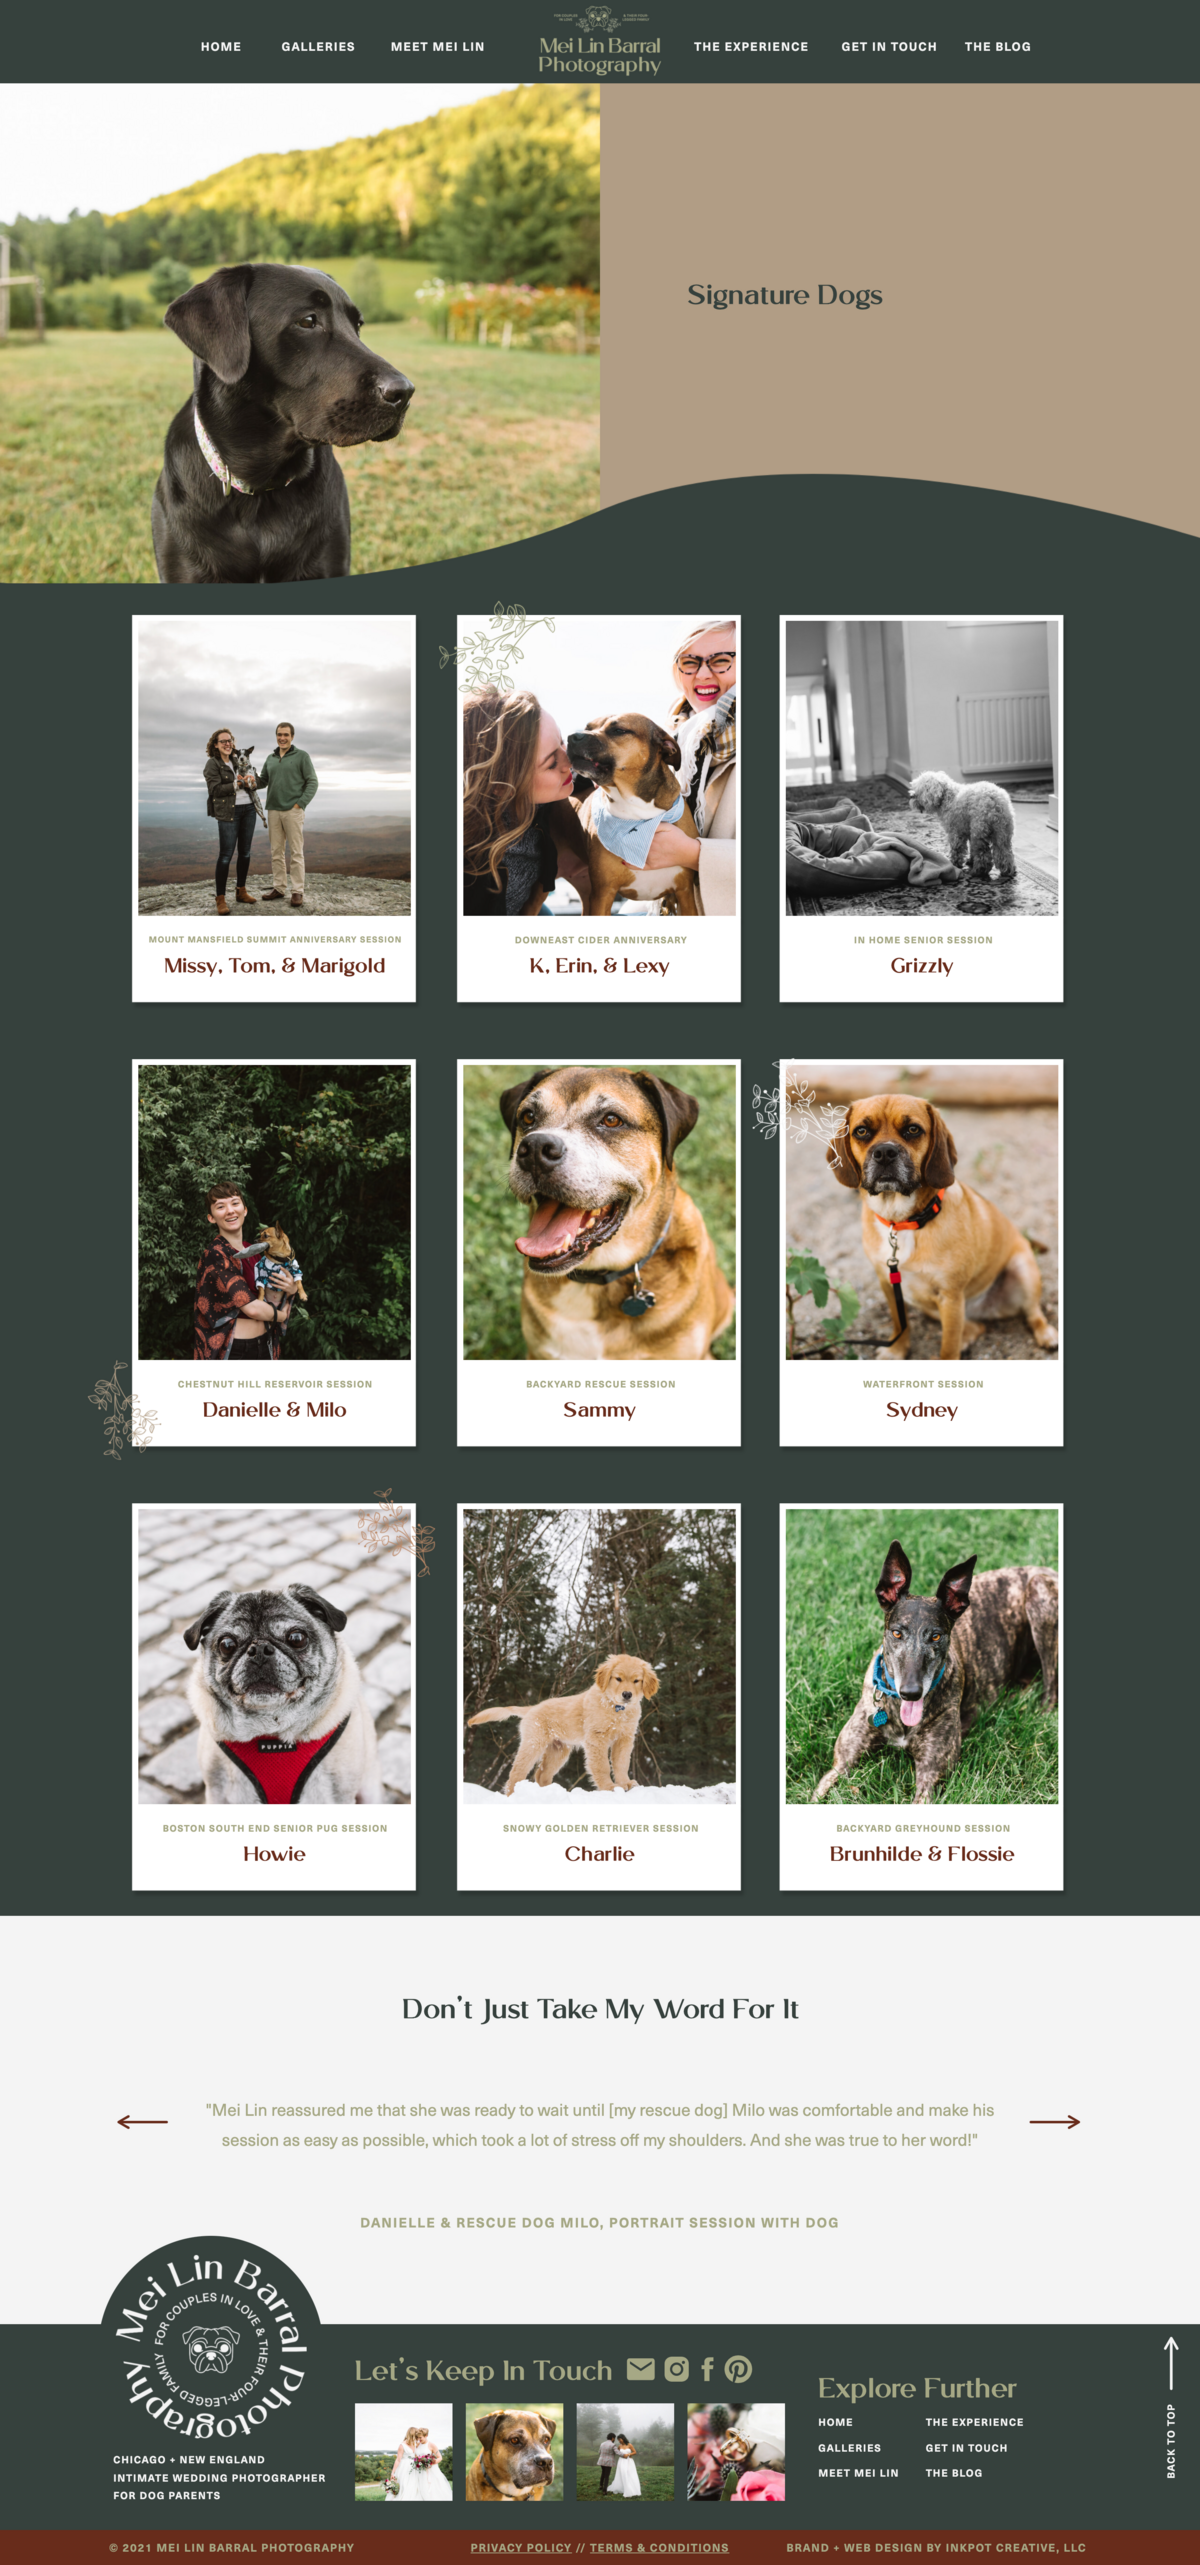 screenshot of full dogs gallery page